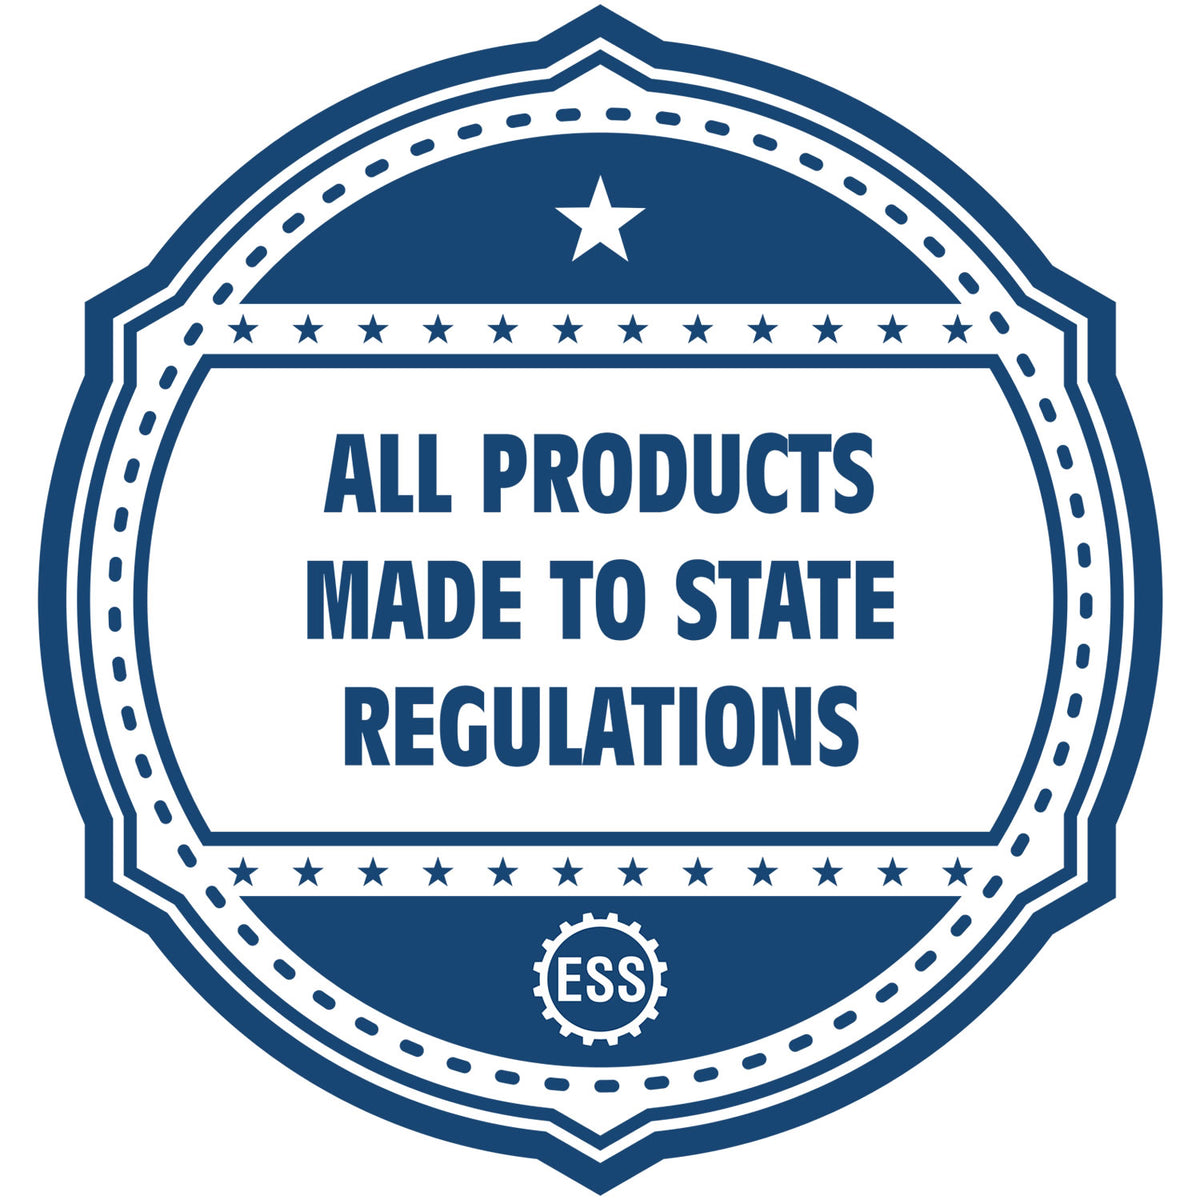 An icon or badge element for the Slim Pre-Inked Montana Land Surveyor Seal Stamp showing that this product is made in compliance with state regulations.